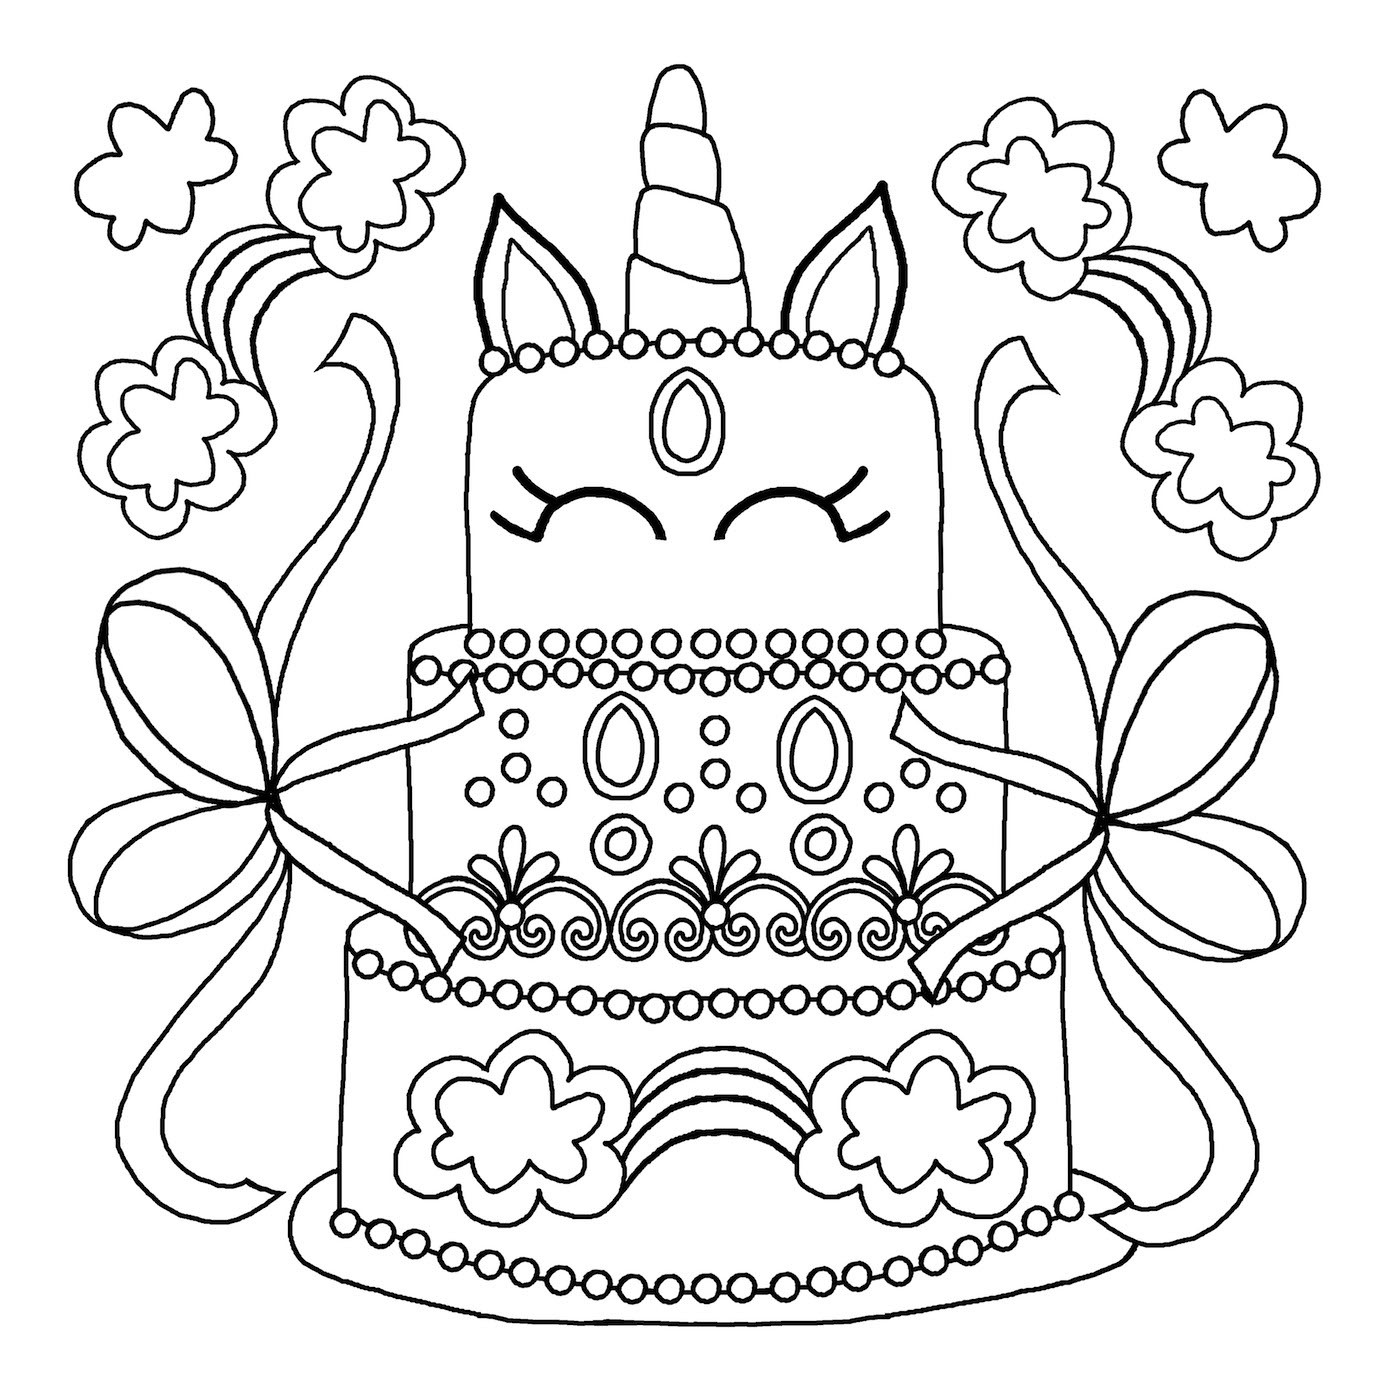 Printable Unicorn Coloring Pages Boys
 unicorn colouring book pages 3 Michael O Mara Books